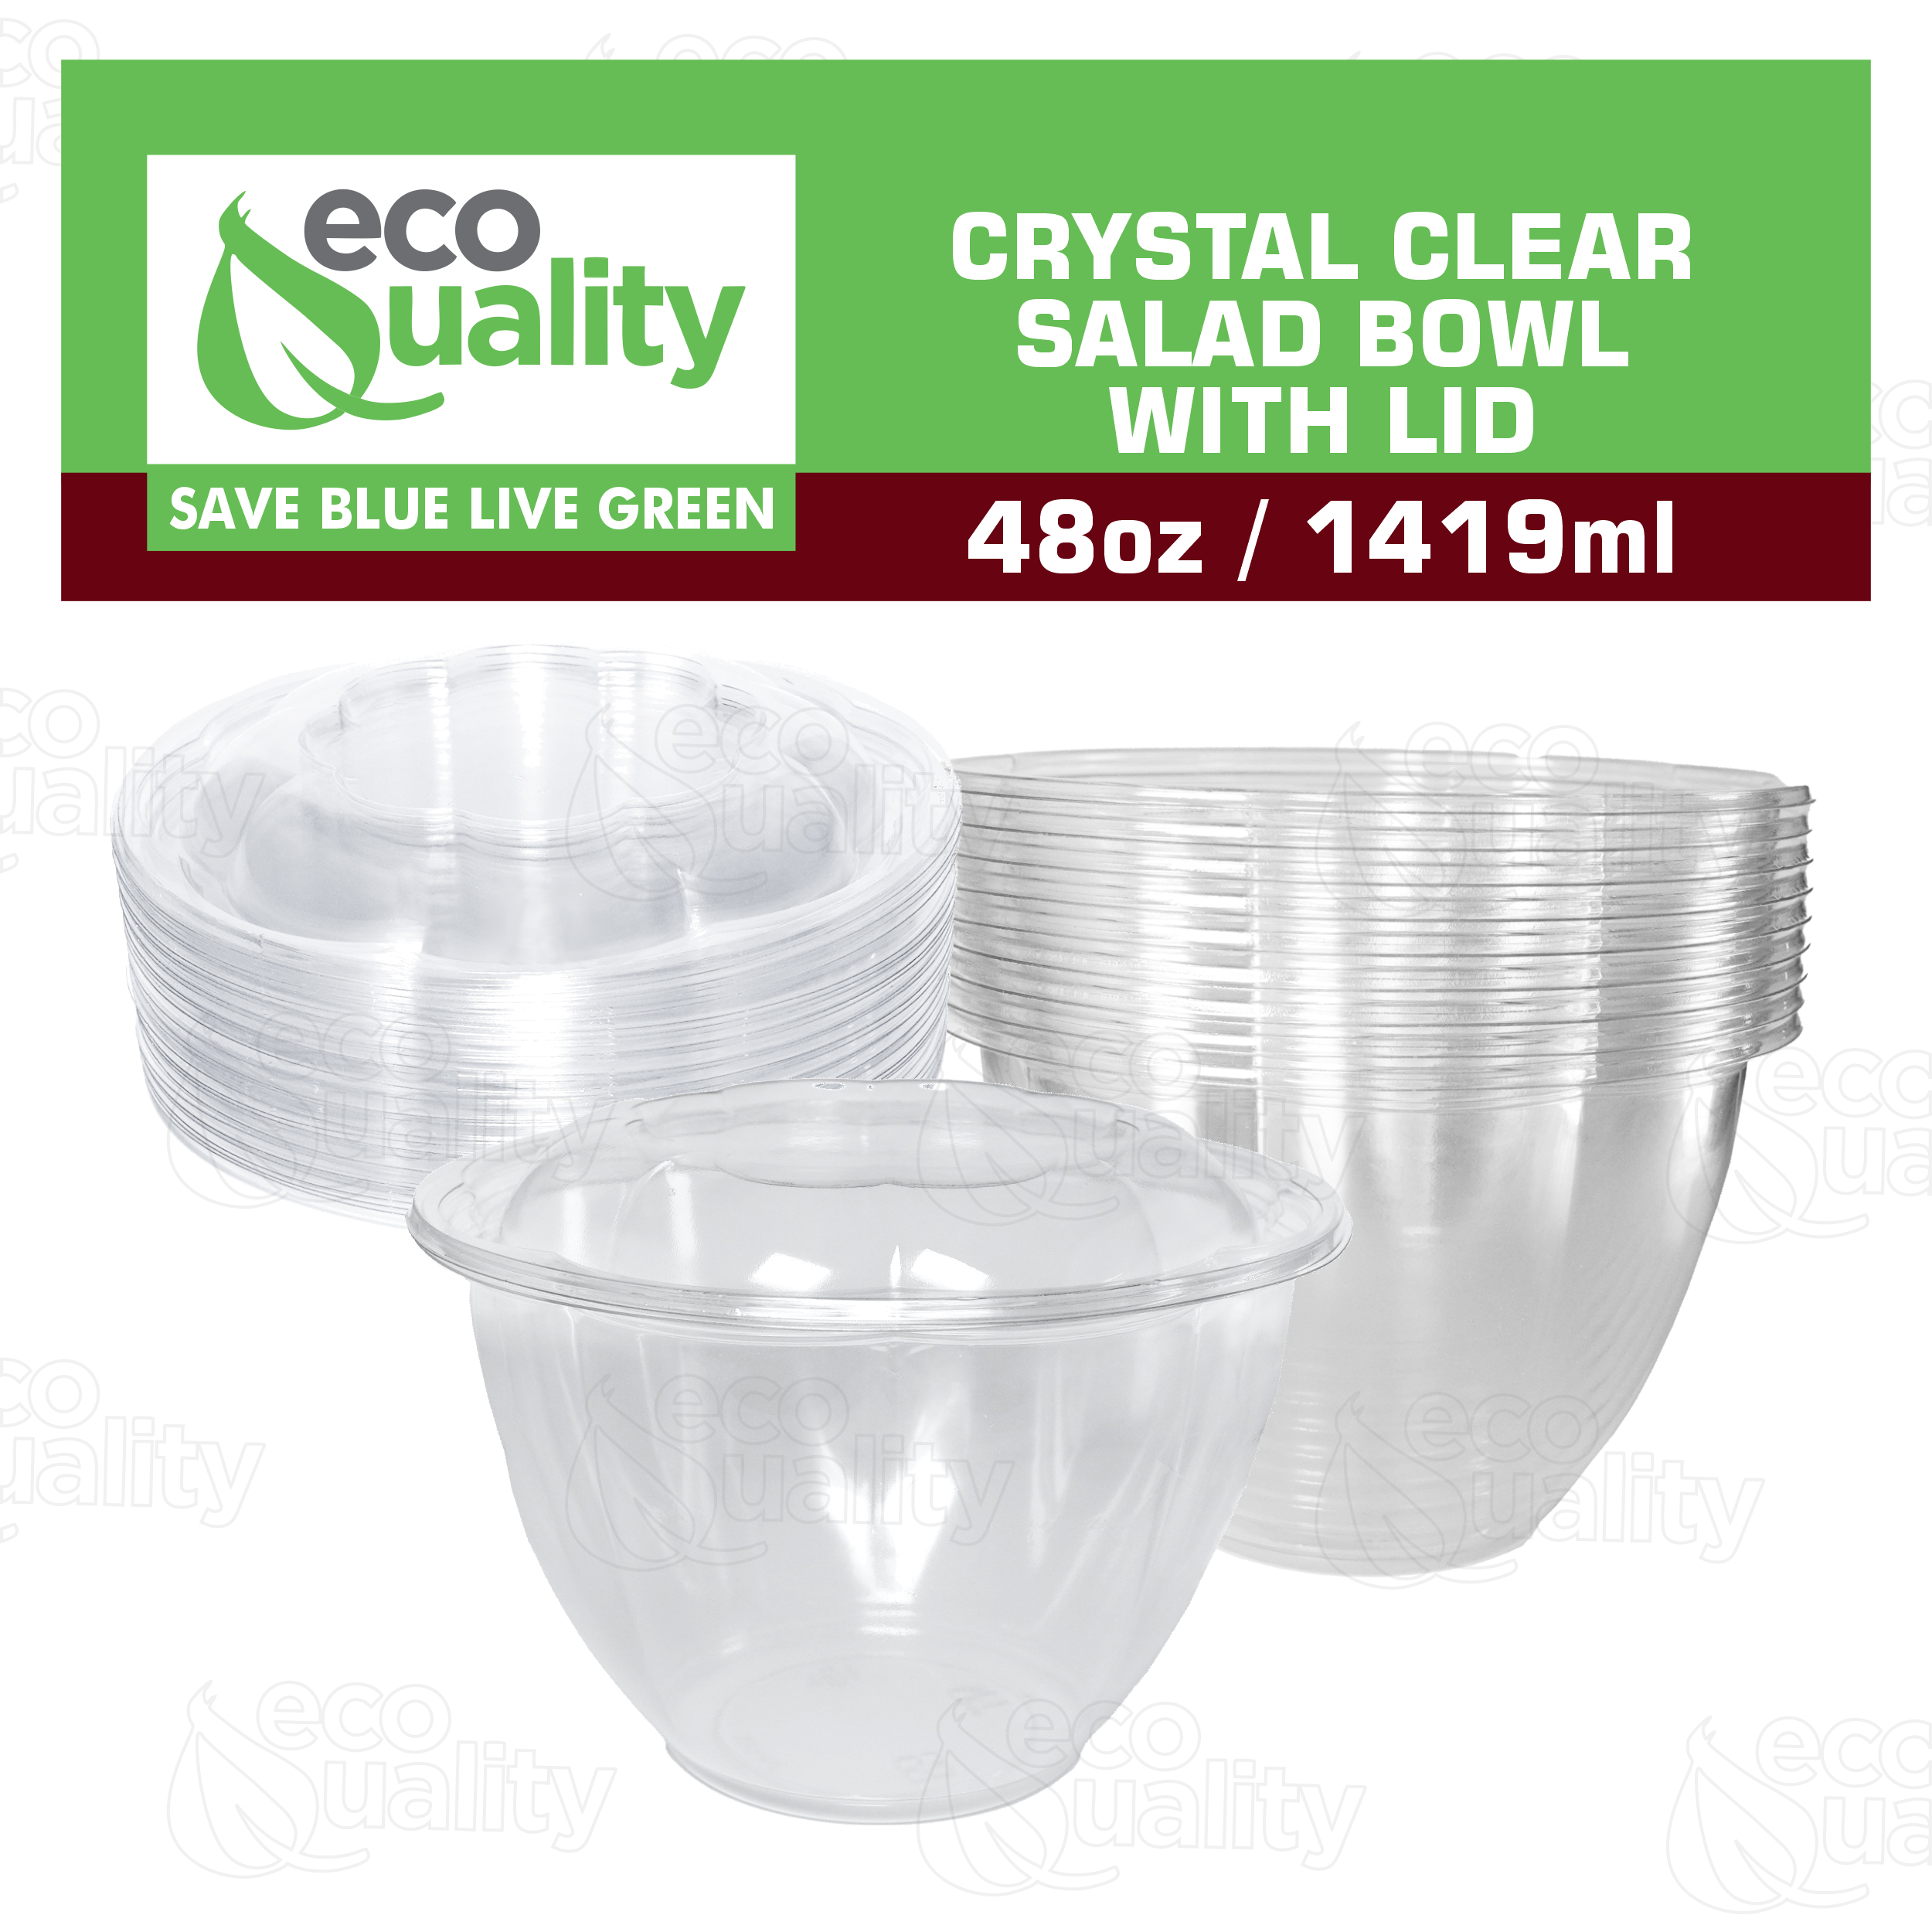 [50 PACK] 48oz Clear Disposable Salad Bowls with Lids - Clear Plastic Disposable Salad Containers for Lunch To-Go, Salads, Fruits, Airtight, Leak Proof, Fresh, Meal Prep | Rose Bowl Container (48 OZ) - image 4 of 7